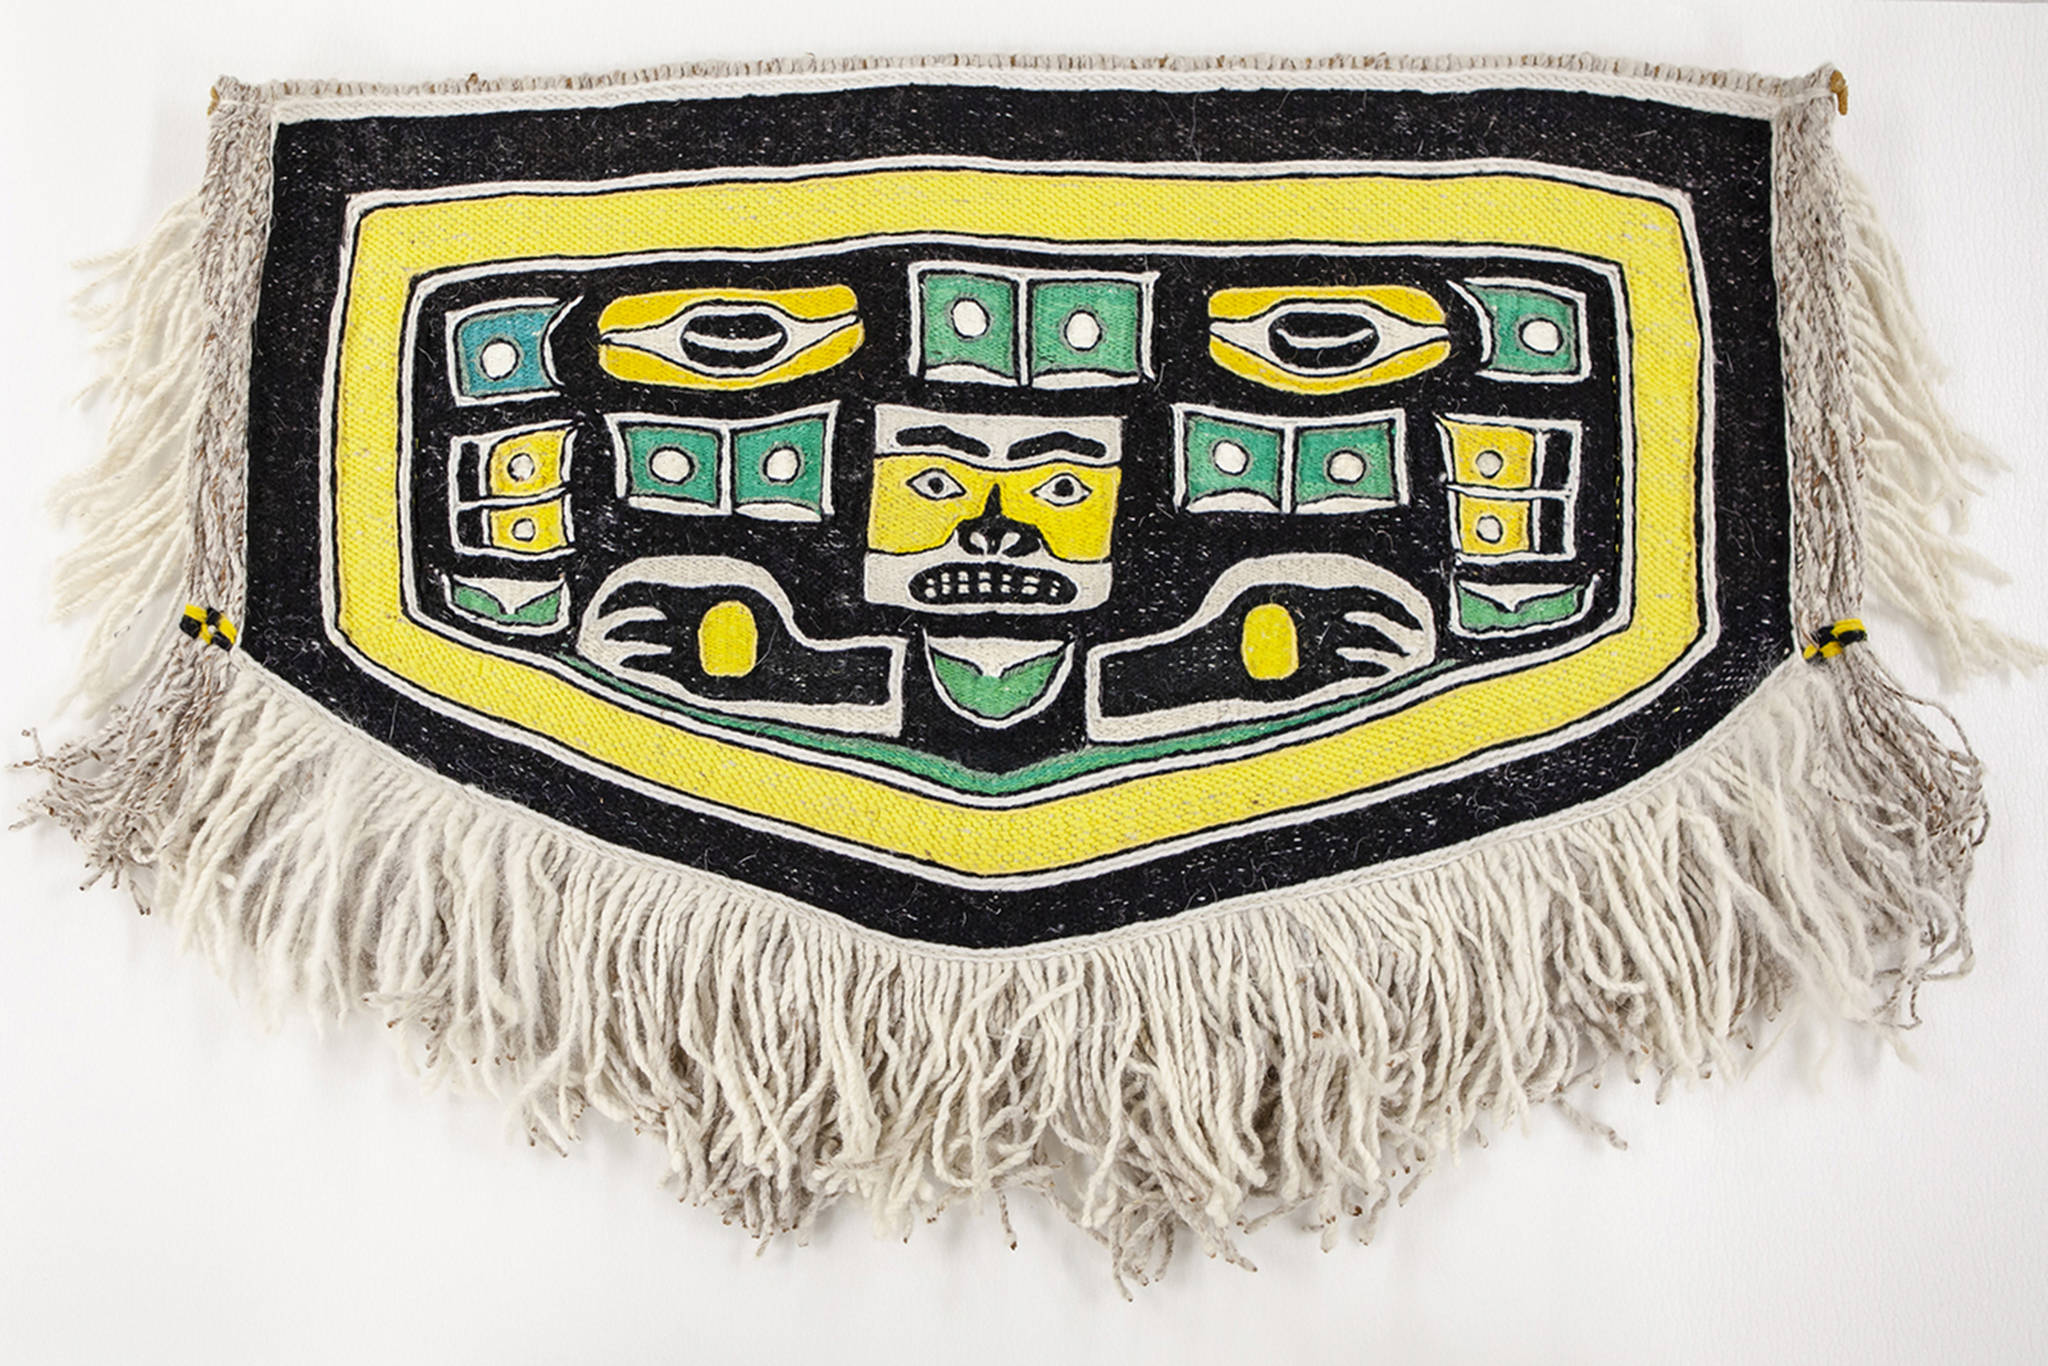 The Sealaska Heritage Institute purchased this Chilkat blanket, which Tlingit weaver Jennie Thlunaut made for a child in the 1980s. (Courtesy Photo | Nobu Koch, Sealaska Heritage Institute)